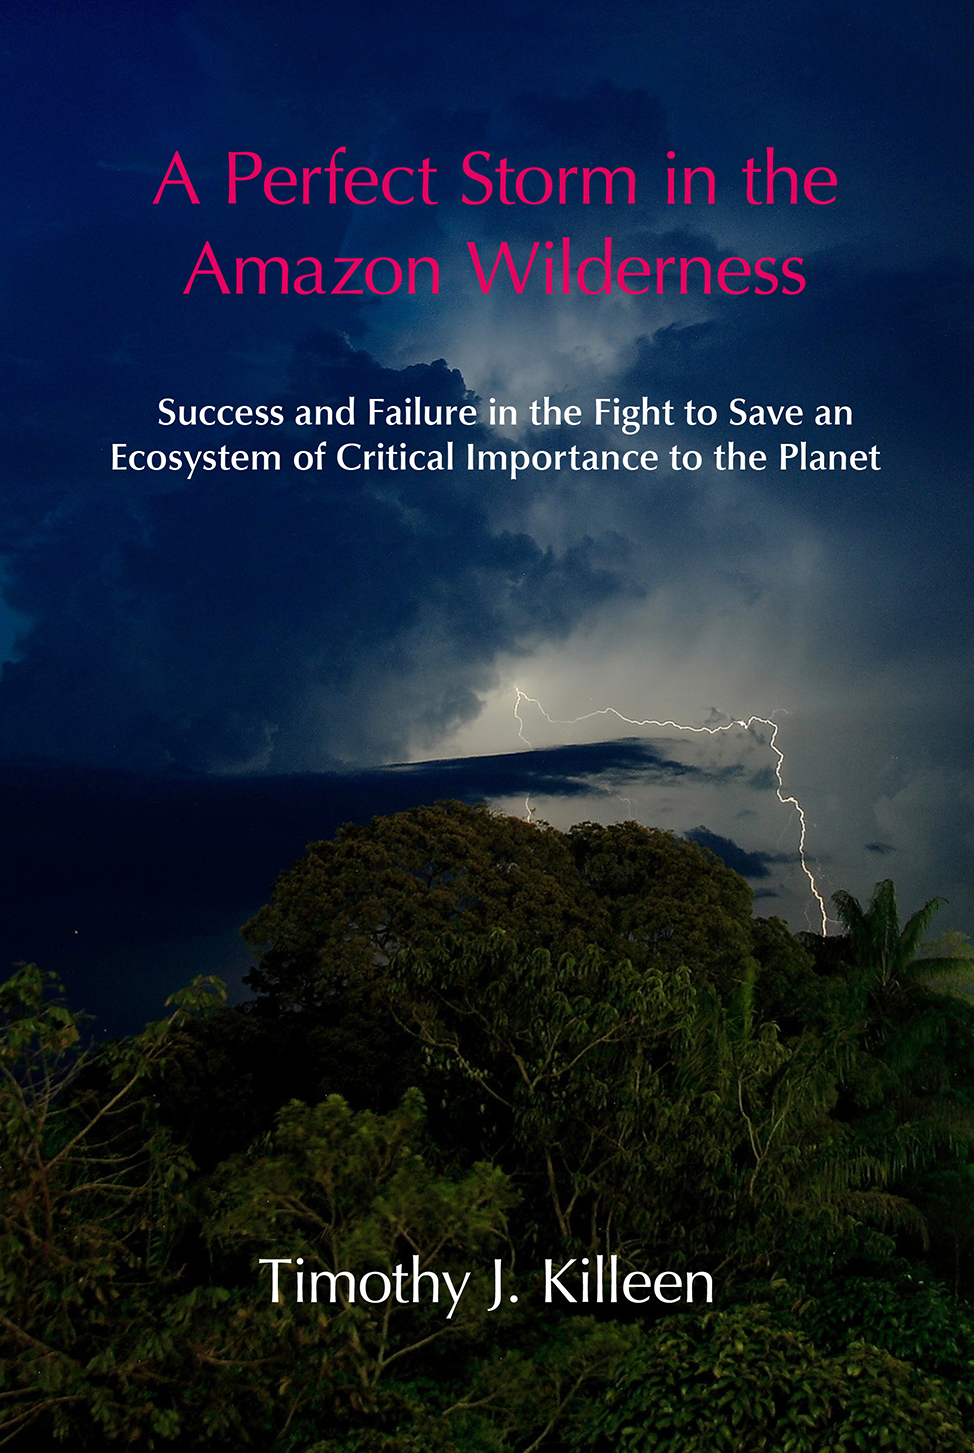 A Perfect Storm in the Amazon Wilderness | Environment & Society Portal